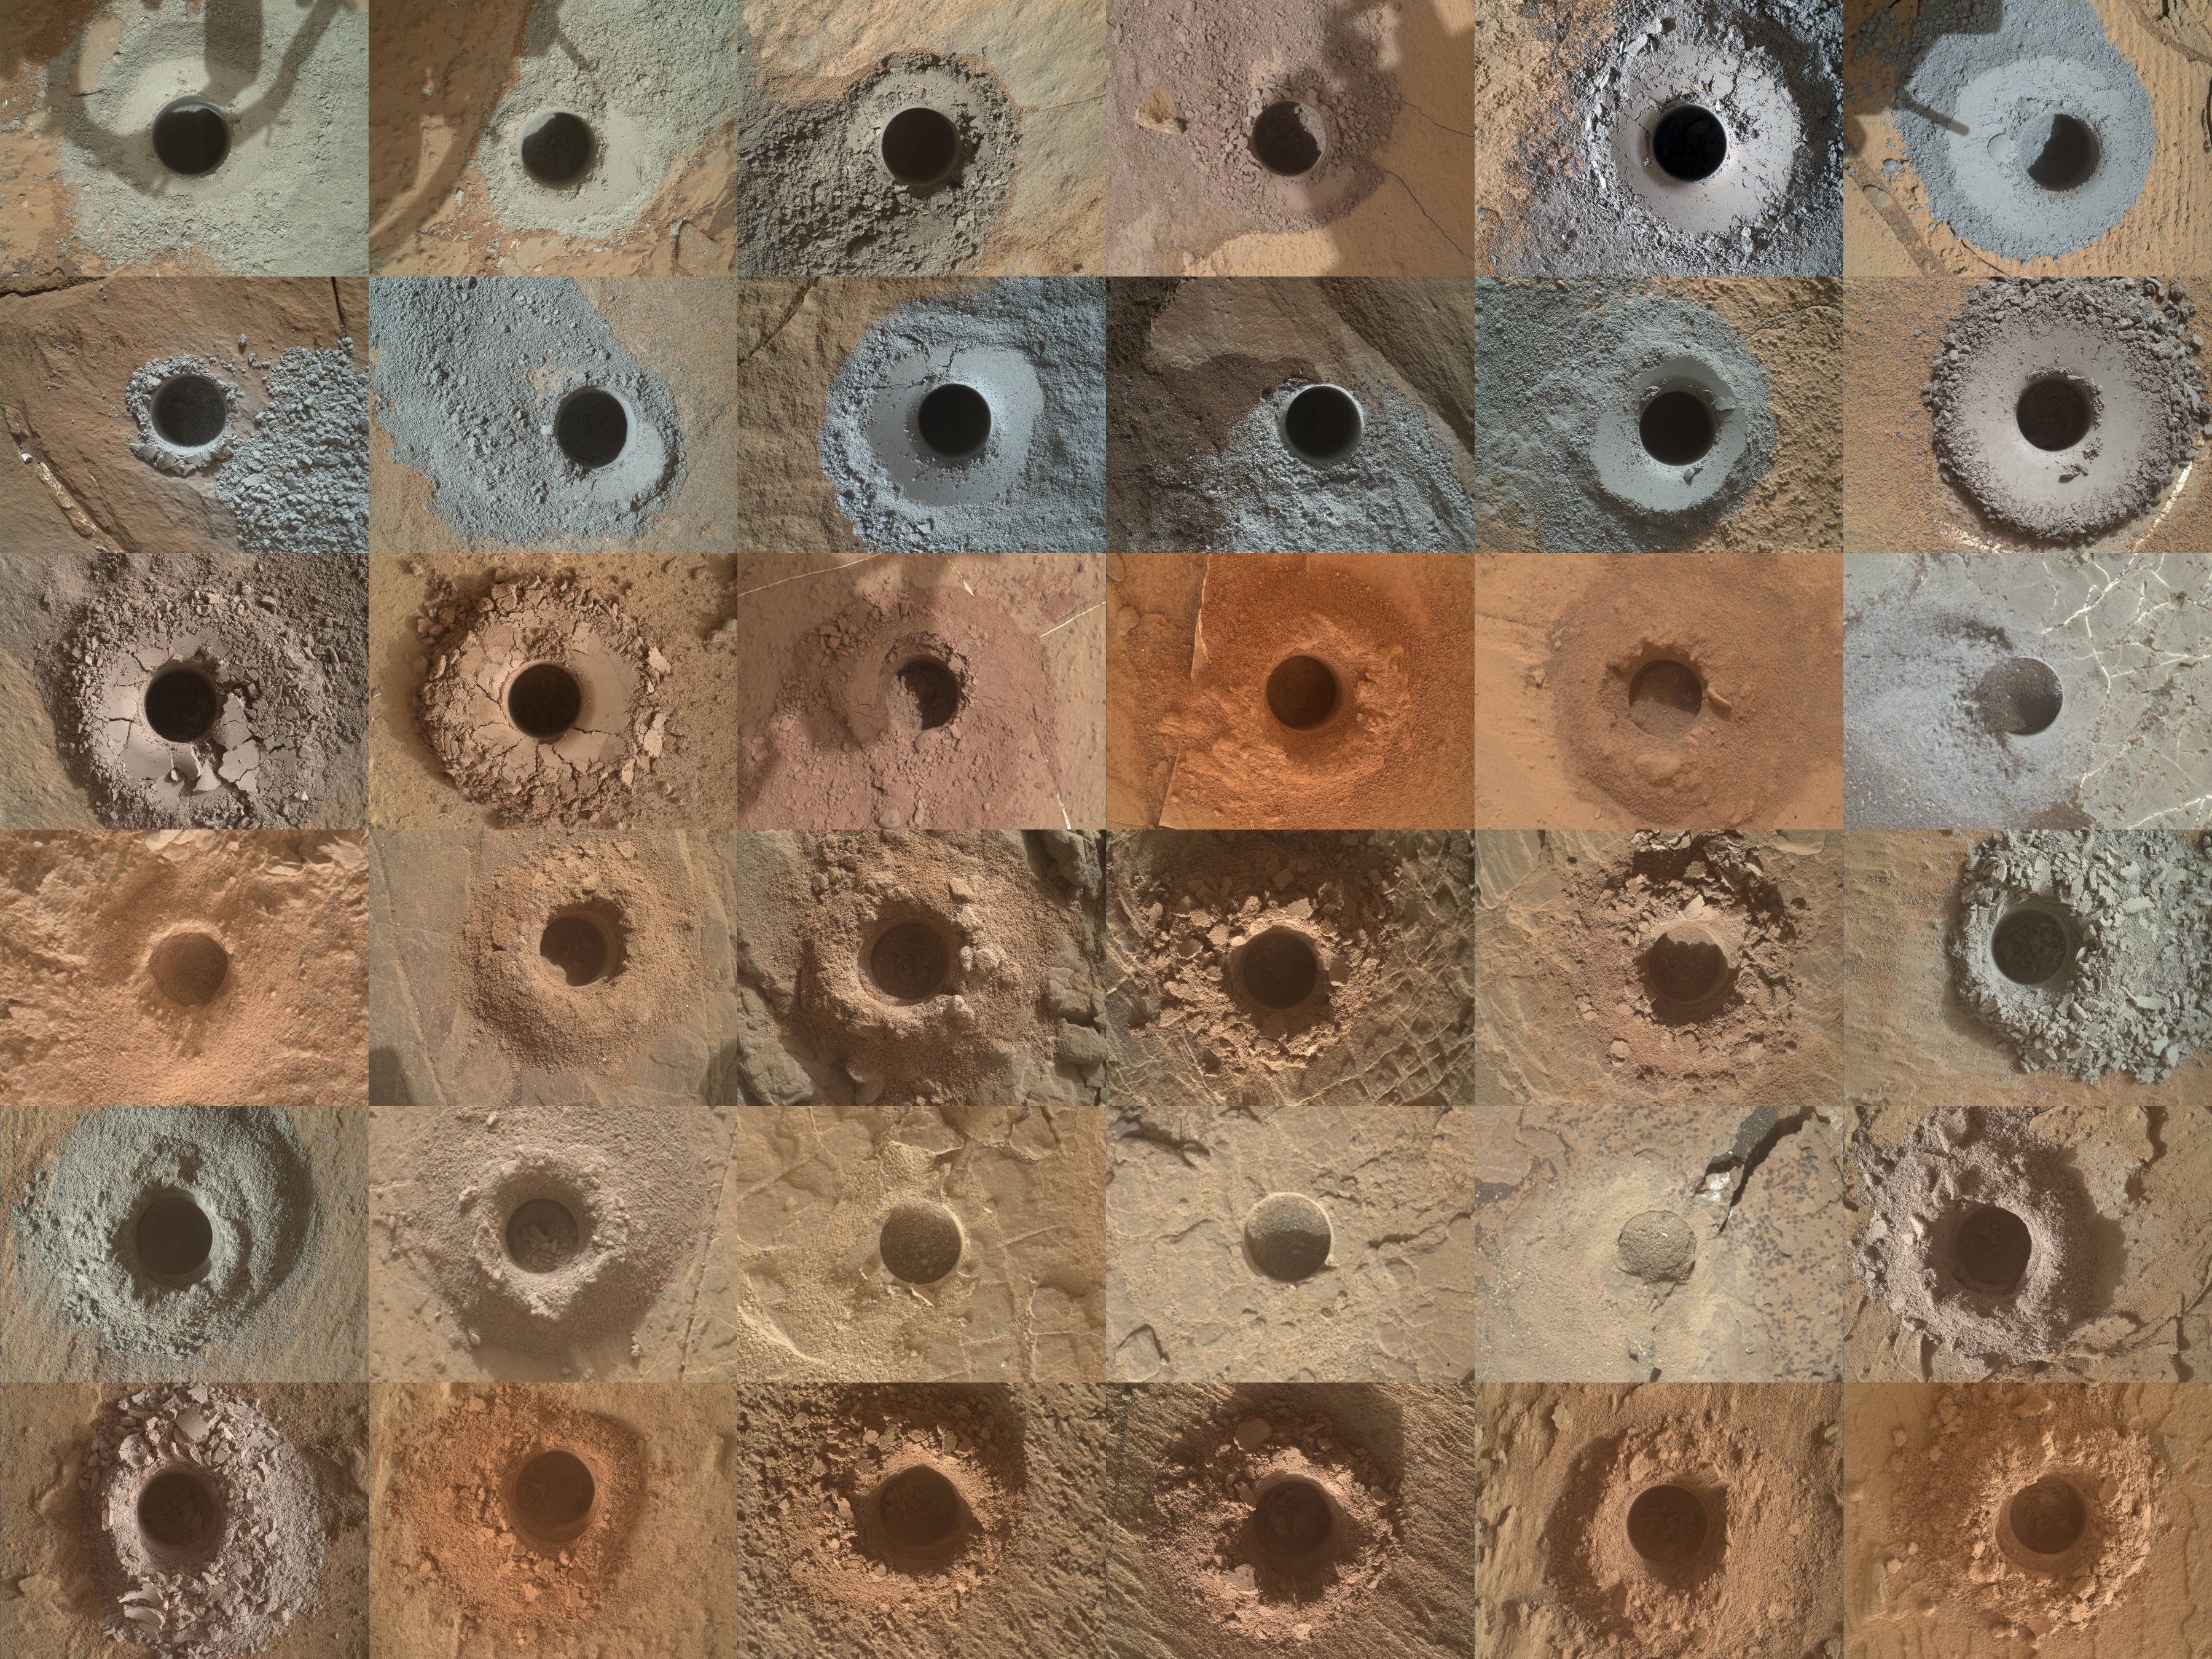 A colorful collection of 36 images that show drill holes in the rocks and soil of Mars.